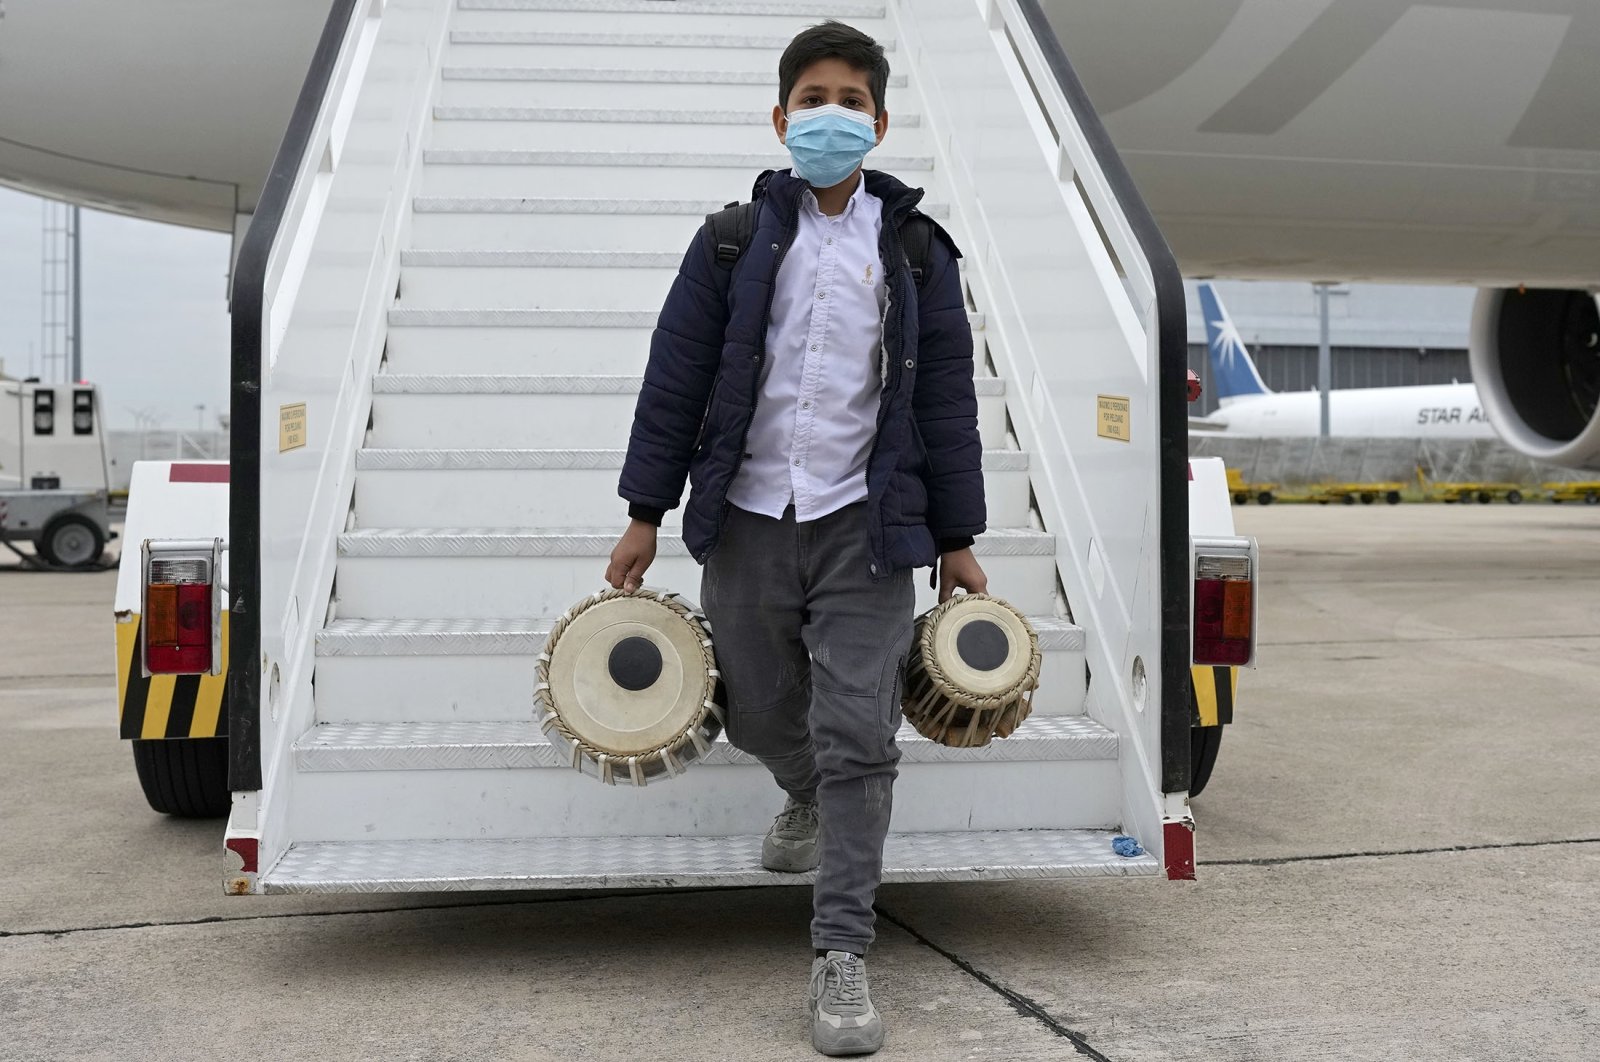 An Afghan boy carrying musical instruments disembarks from an airplane at a military airport, in Lisbon, Portugal, Dec. 13, 2021. (AP Photo)